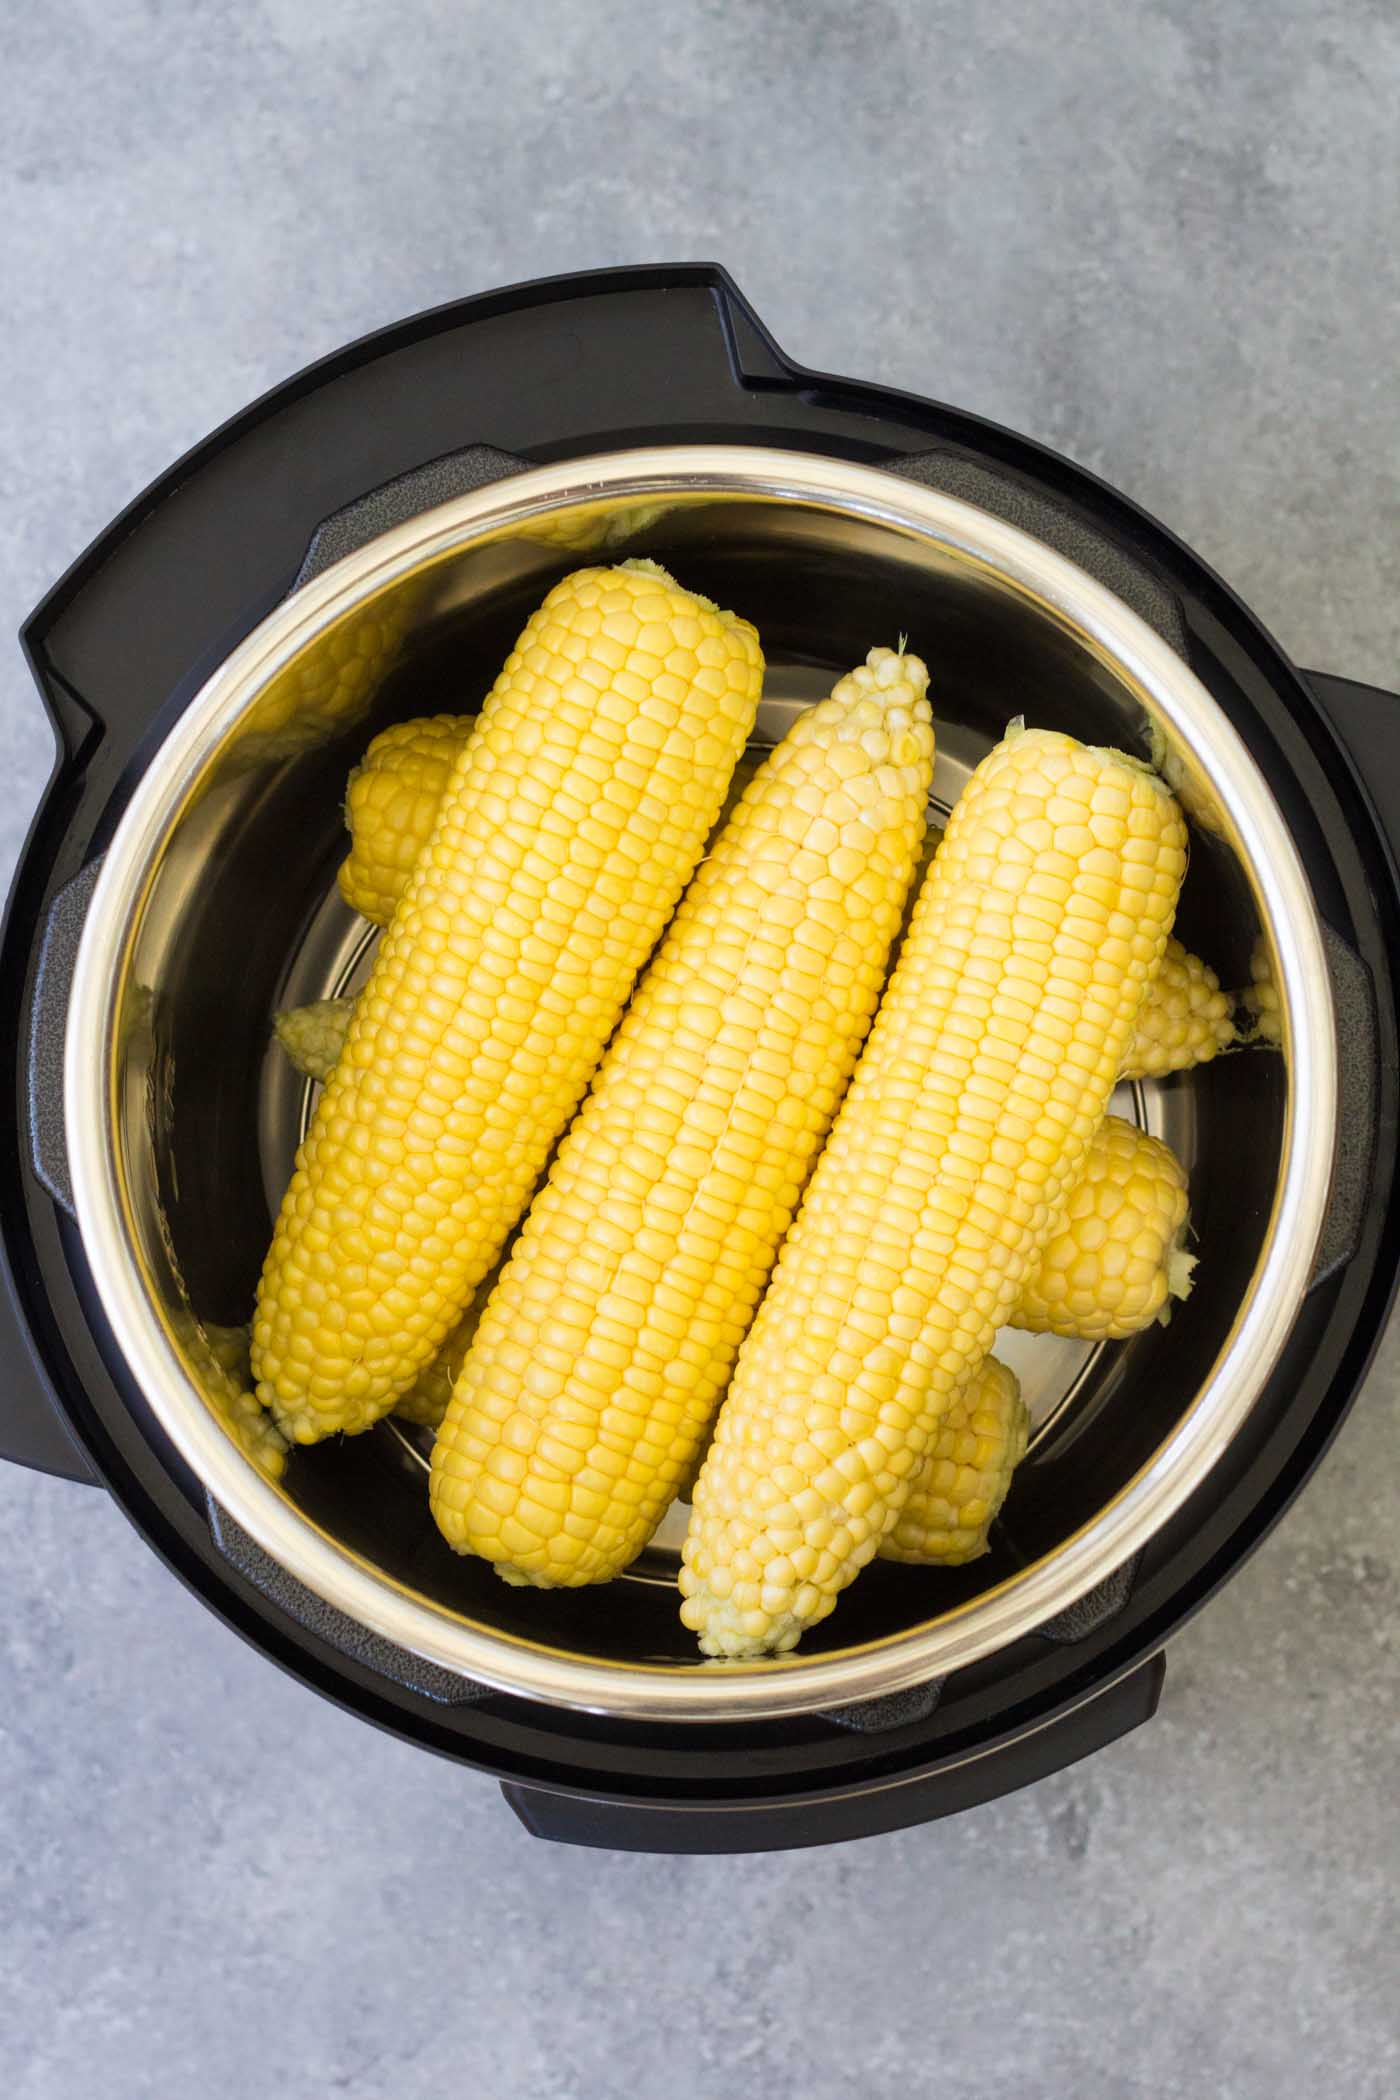 Six ears of uncooked corn on the cob in an instant pot, stacked in alternating directions with 3 ears in each layer.